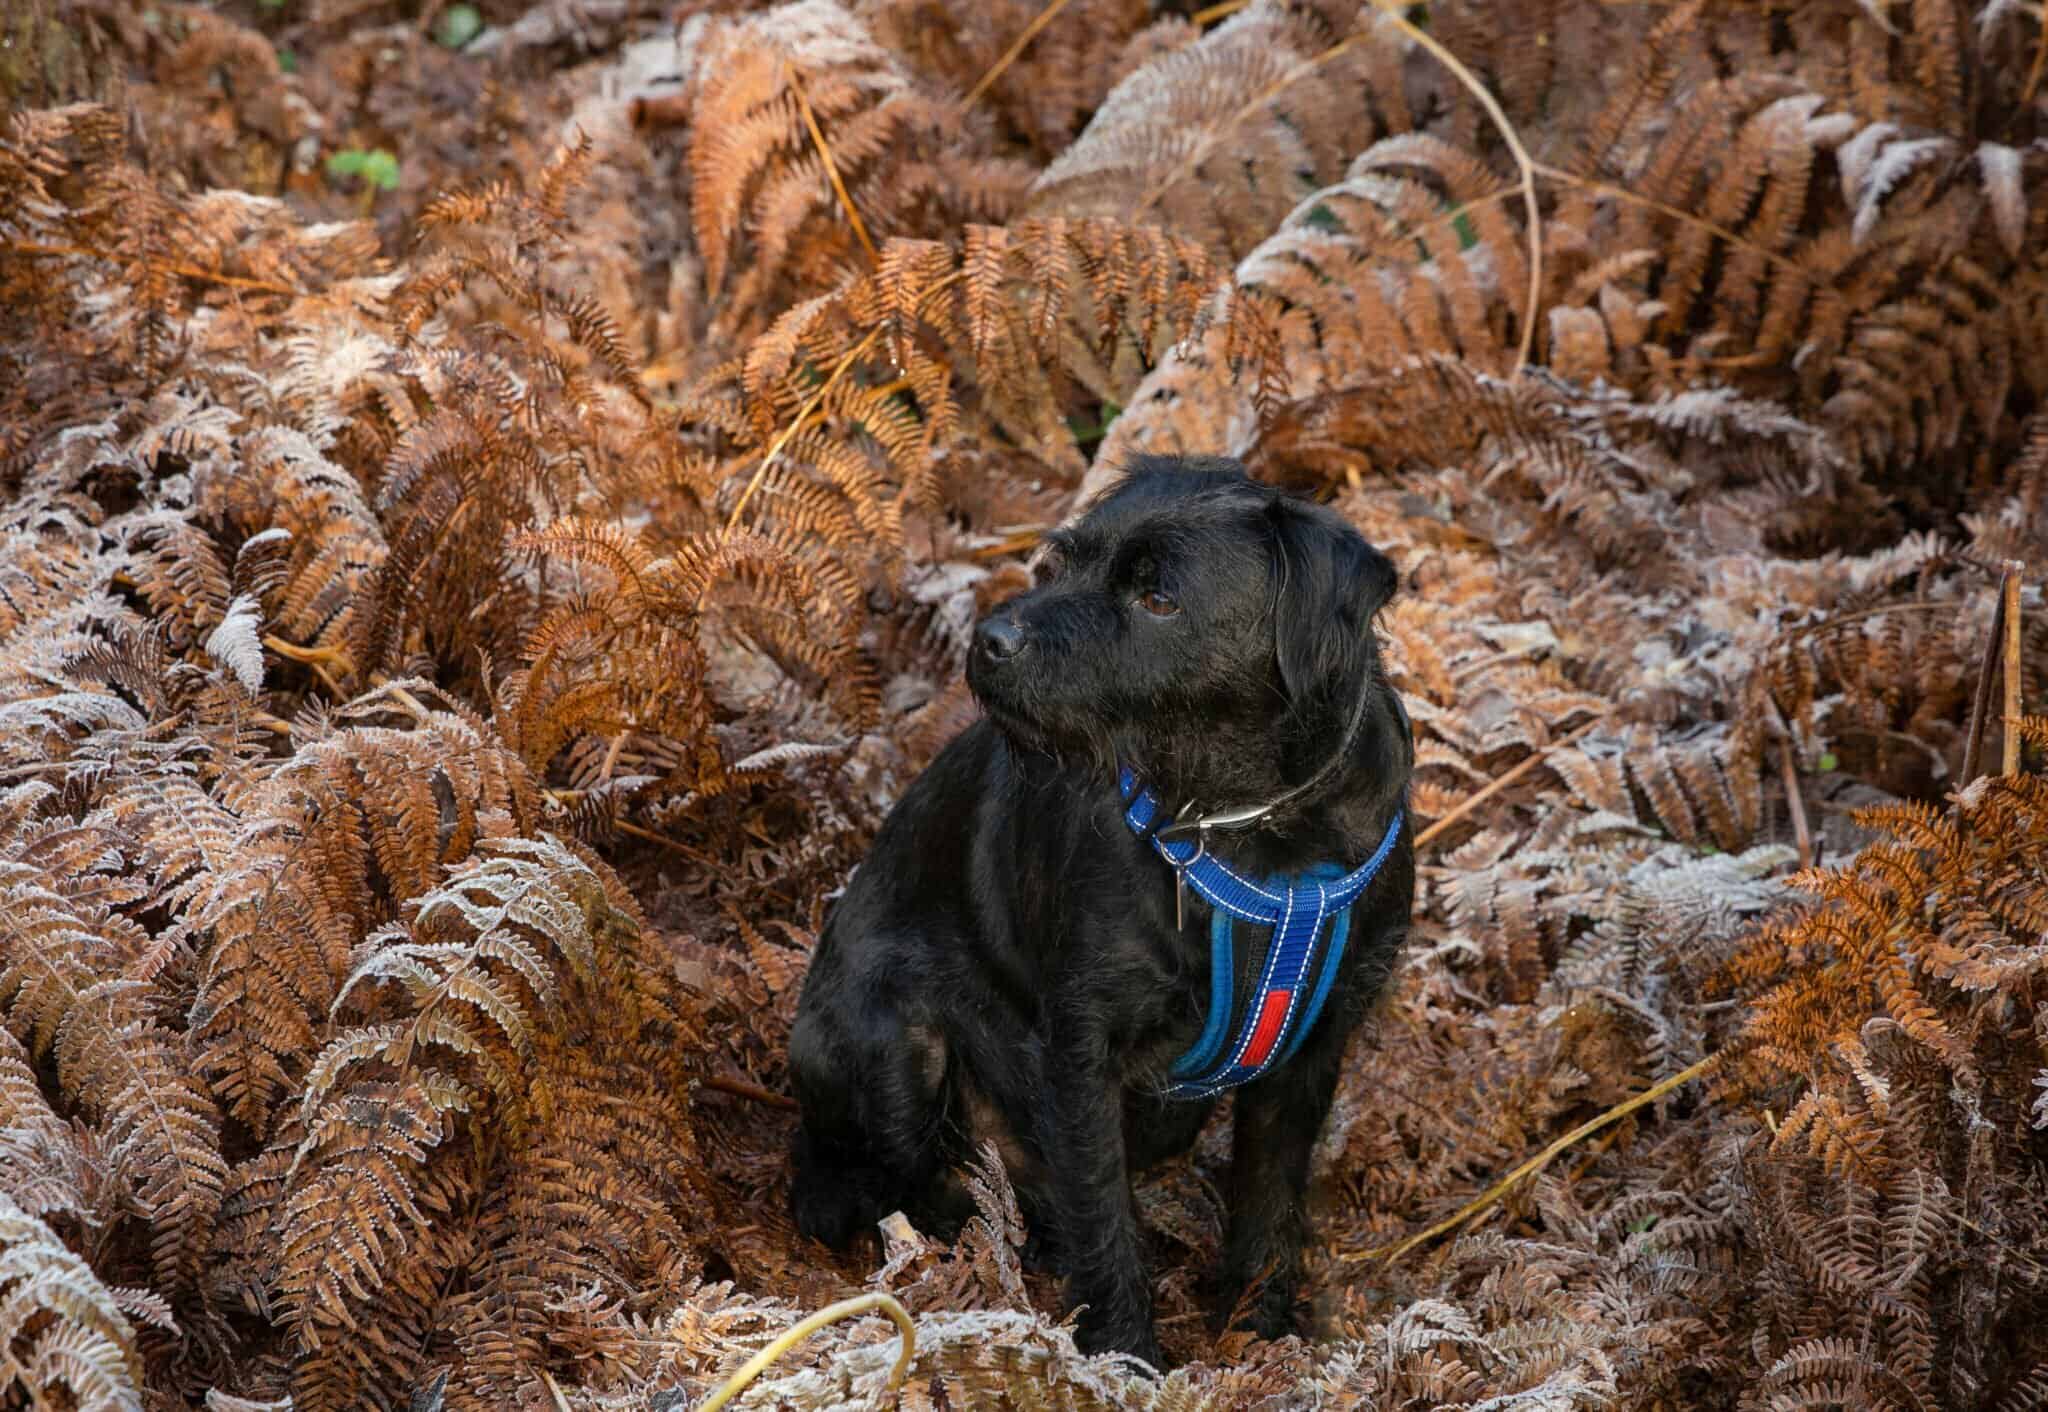 Do Patterdale Terriers Naturally Bark a Lot?